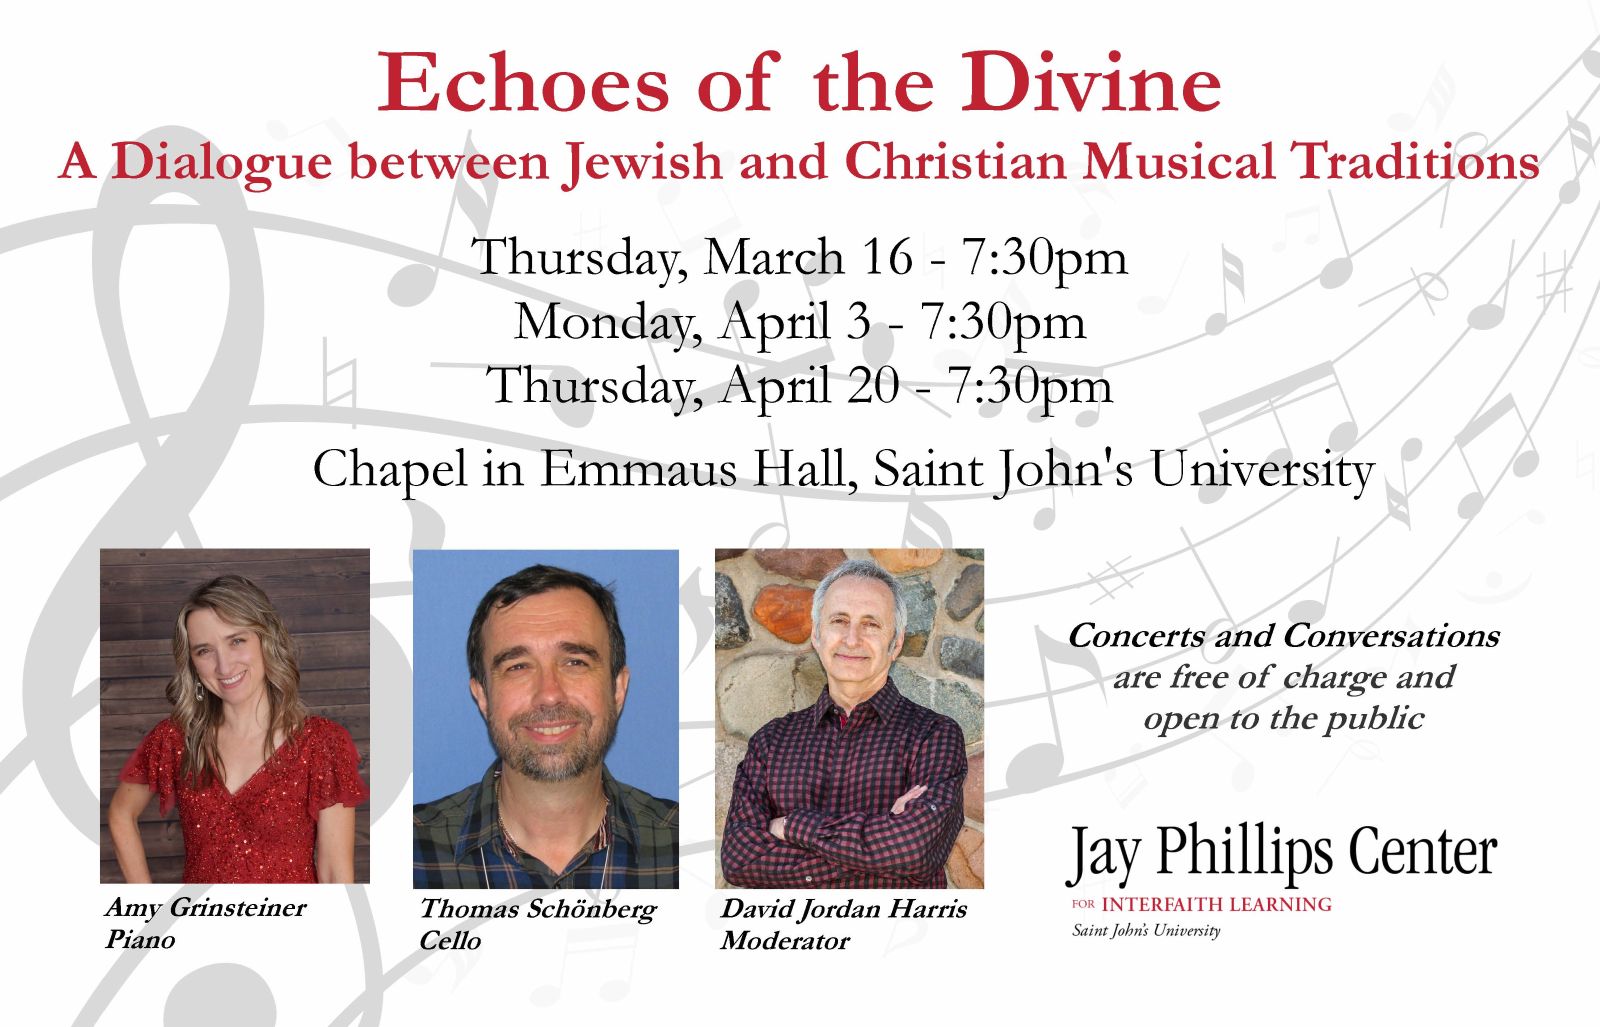 poster%20for%20Echoes%20of%20the%20Divine%20concert%20series%20at%20Saint%20John's%20University.jpg